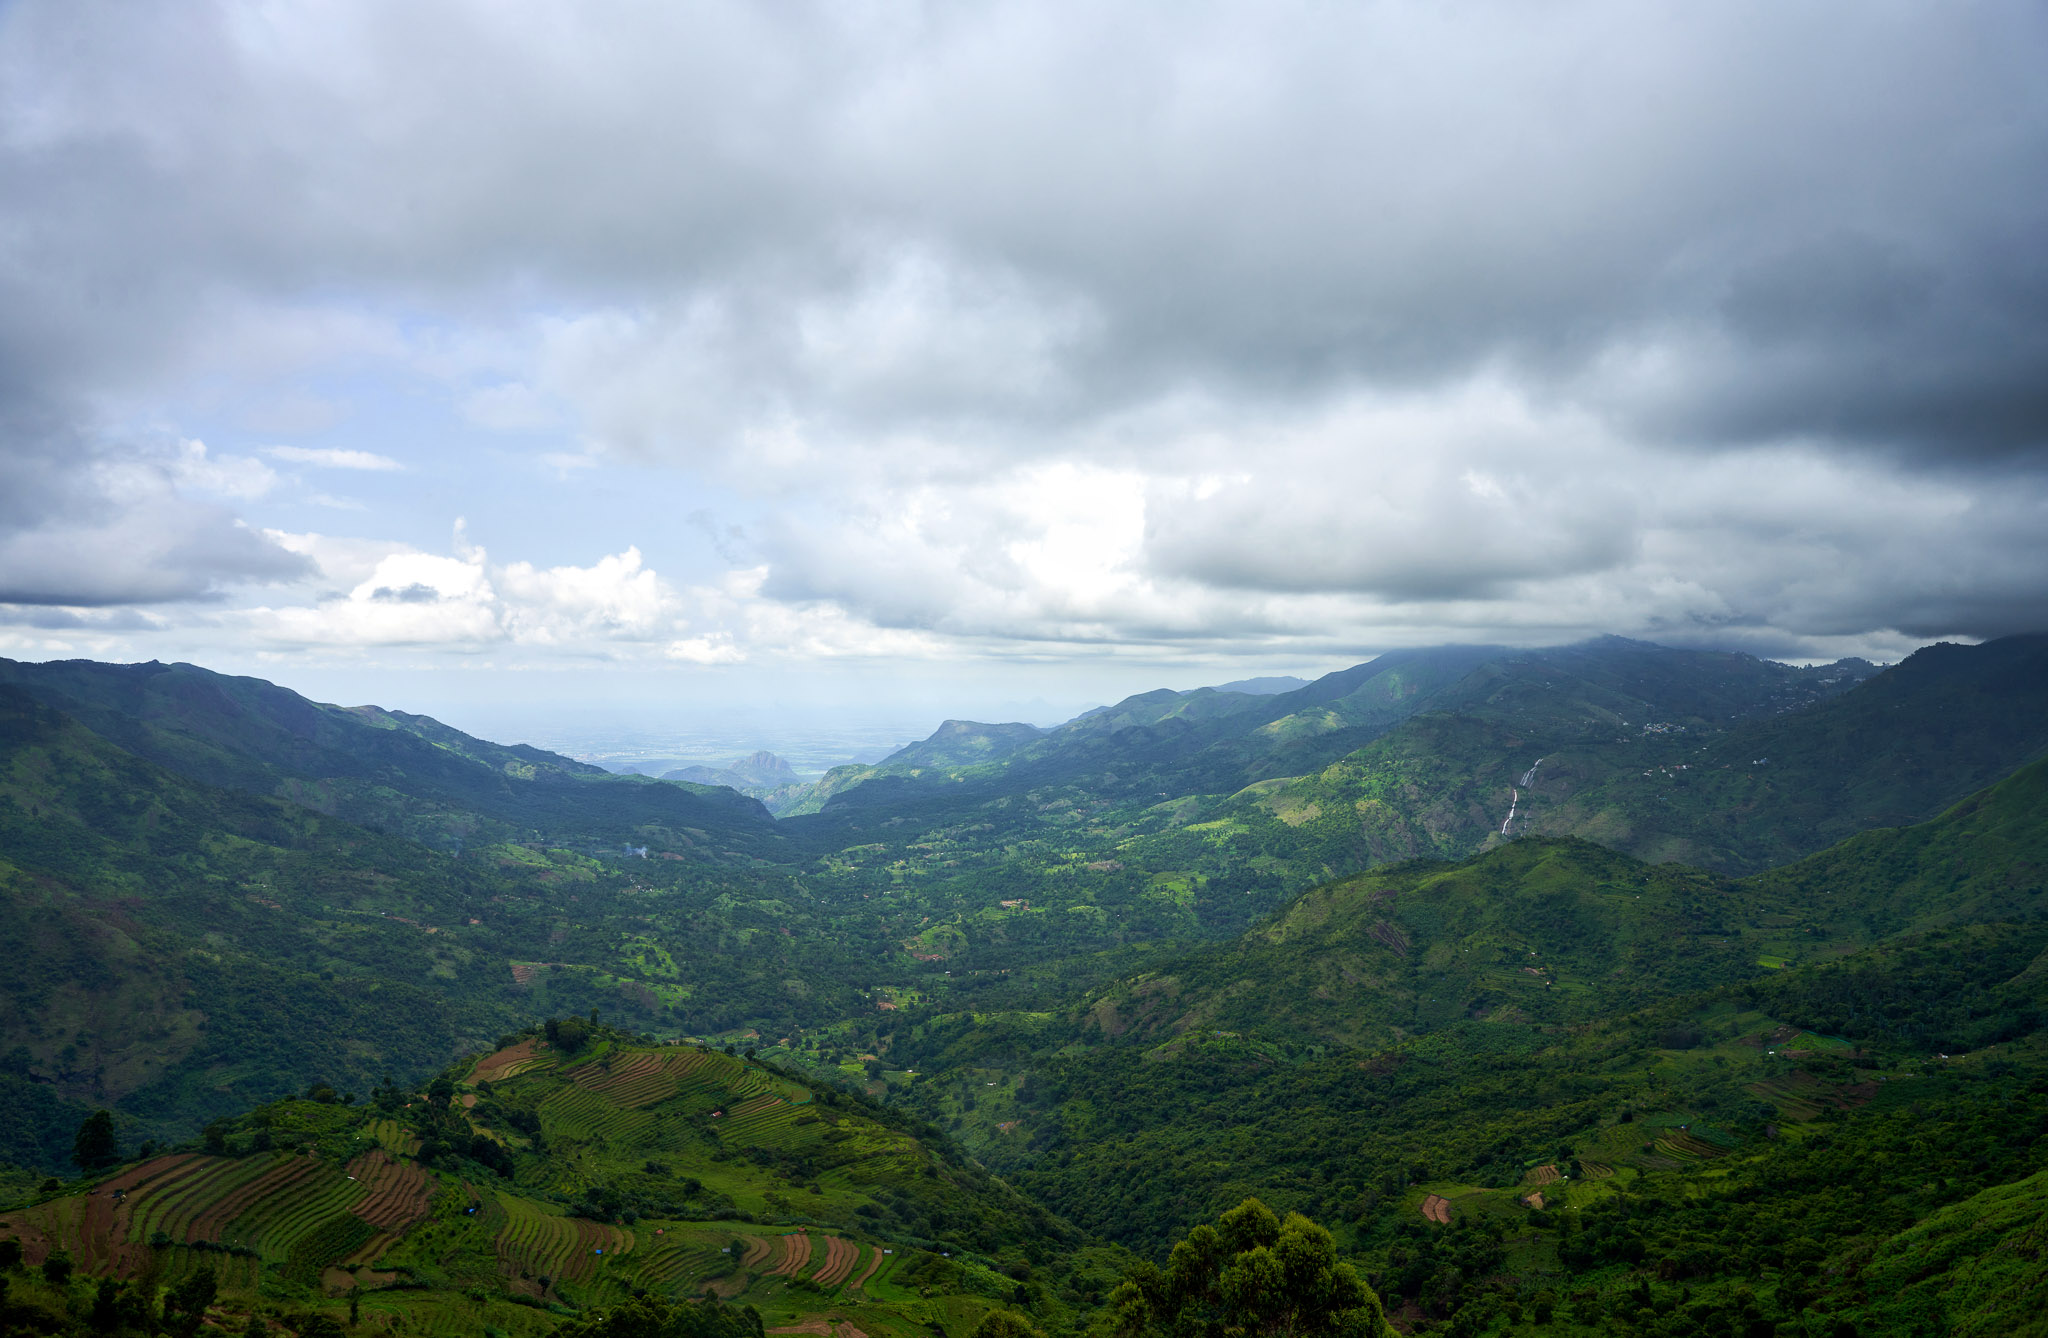 Clouds descending on Western Ghats, a view from the Poombarai Village View Point, Poombarai, Tamil Nadu, India